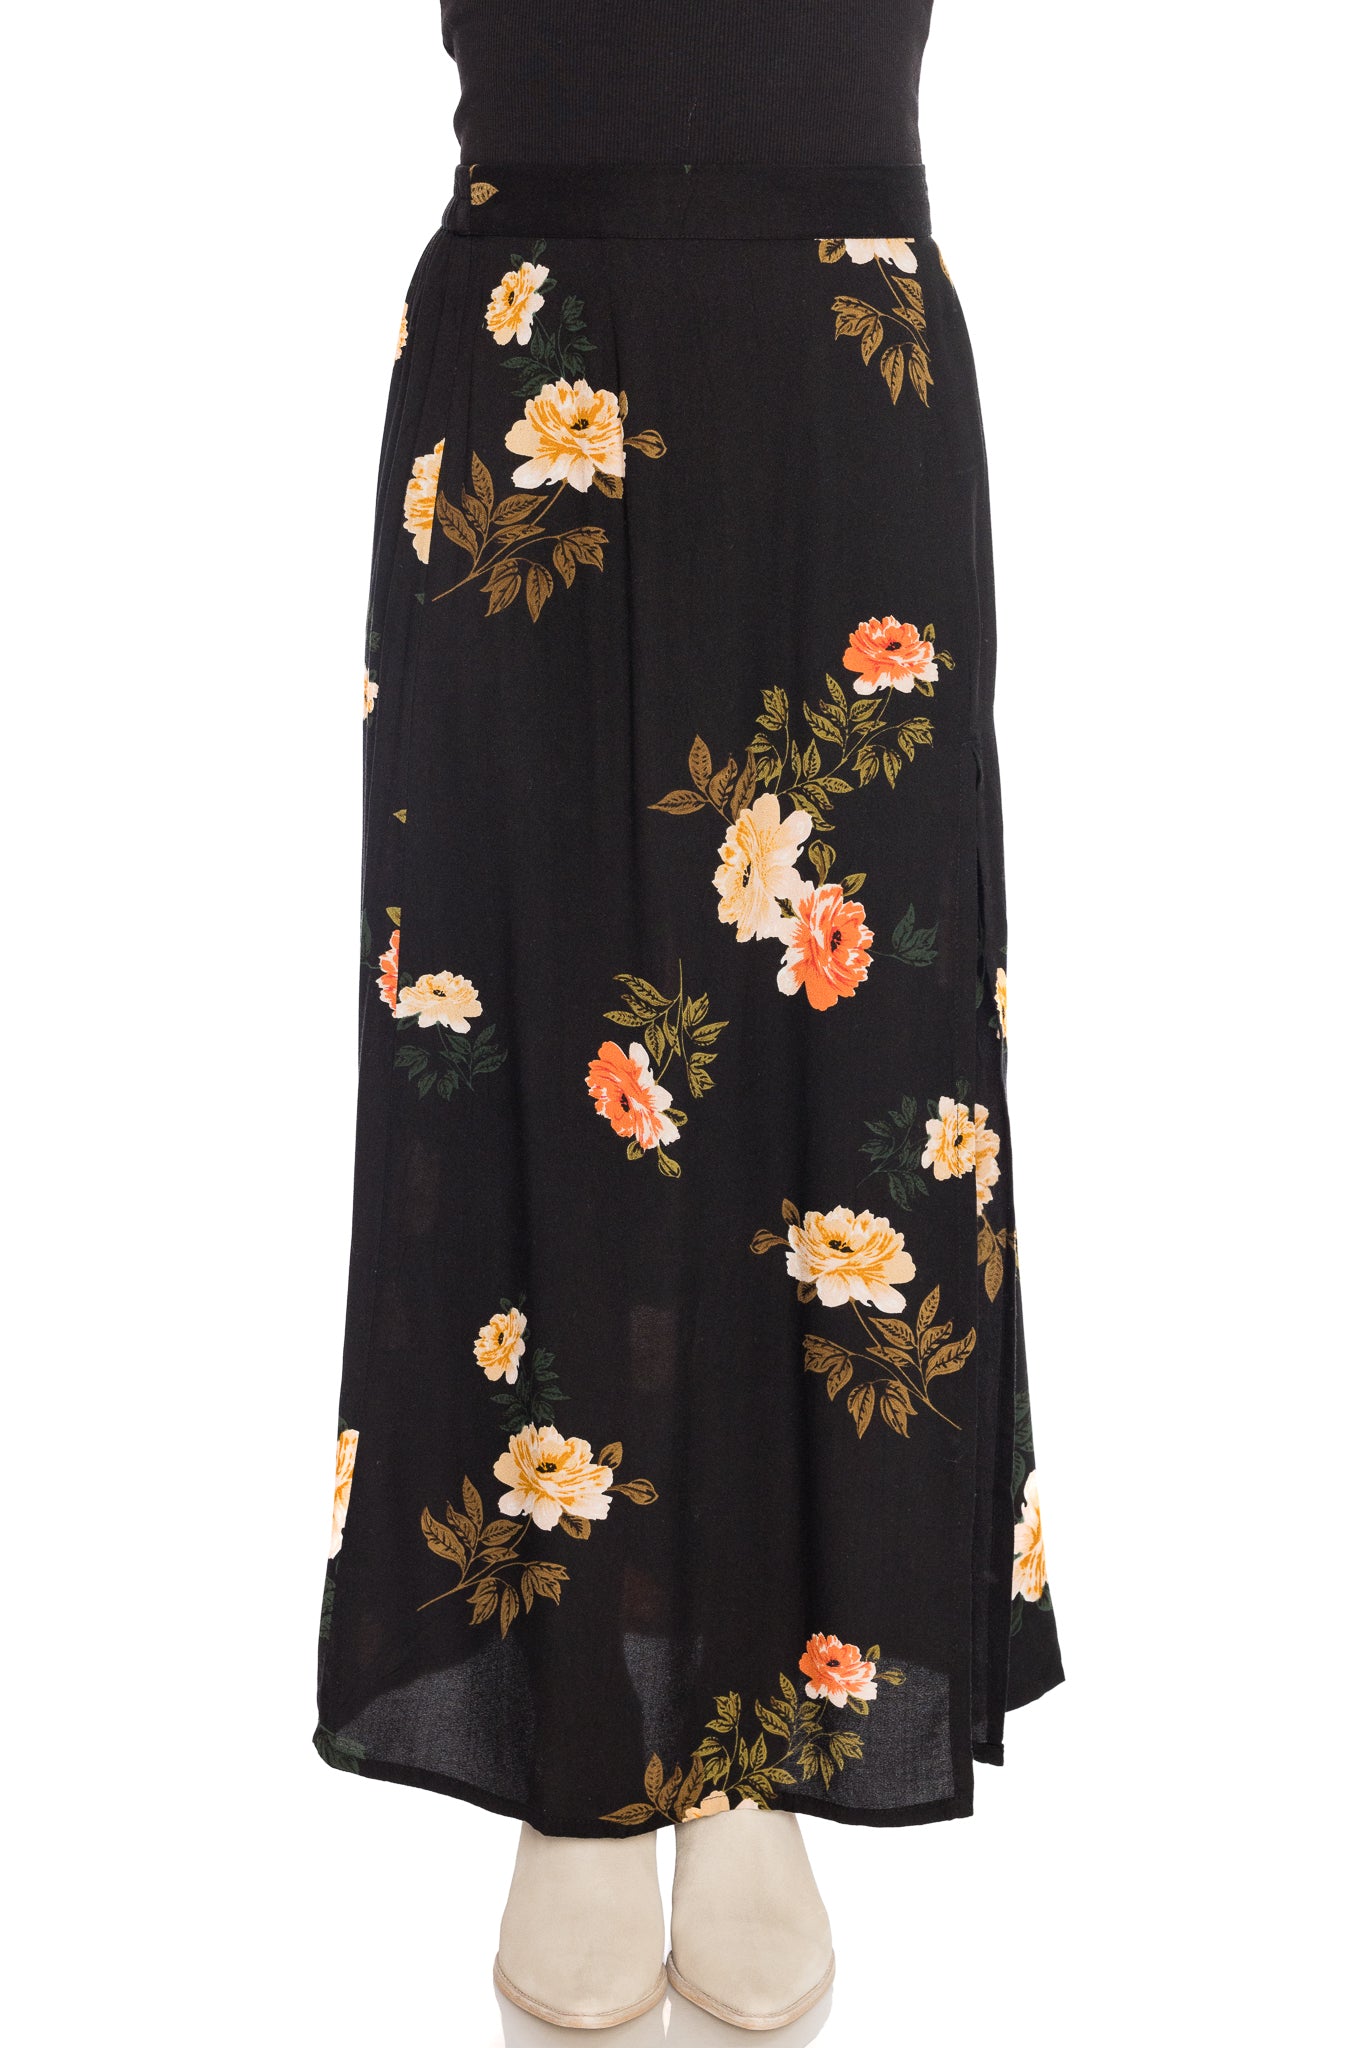 Narissa Maxi Skirt by Saltwater Luxe